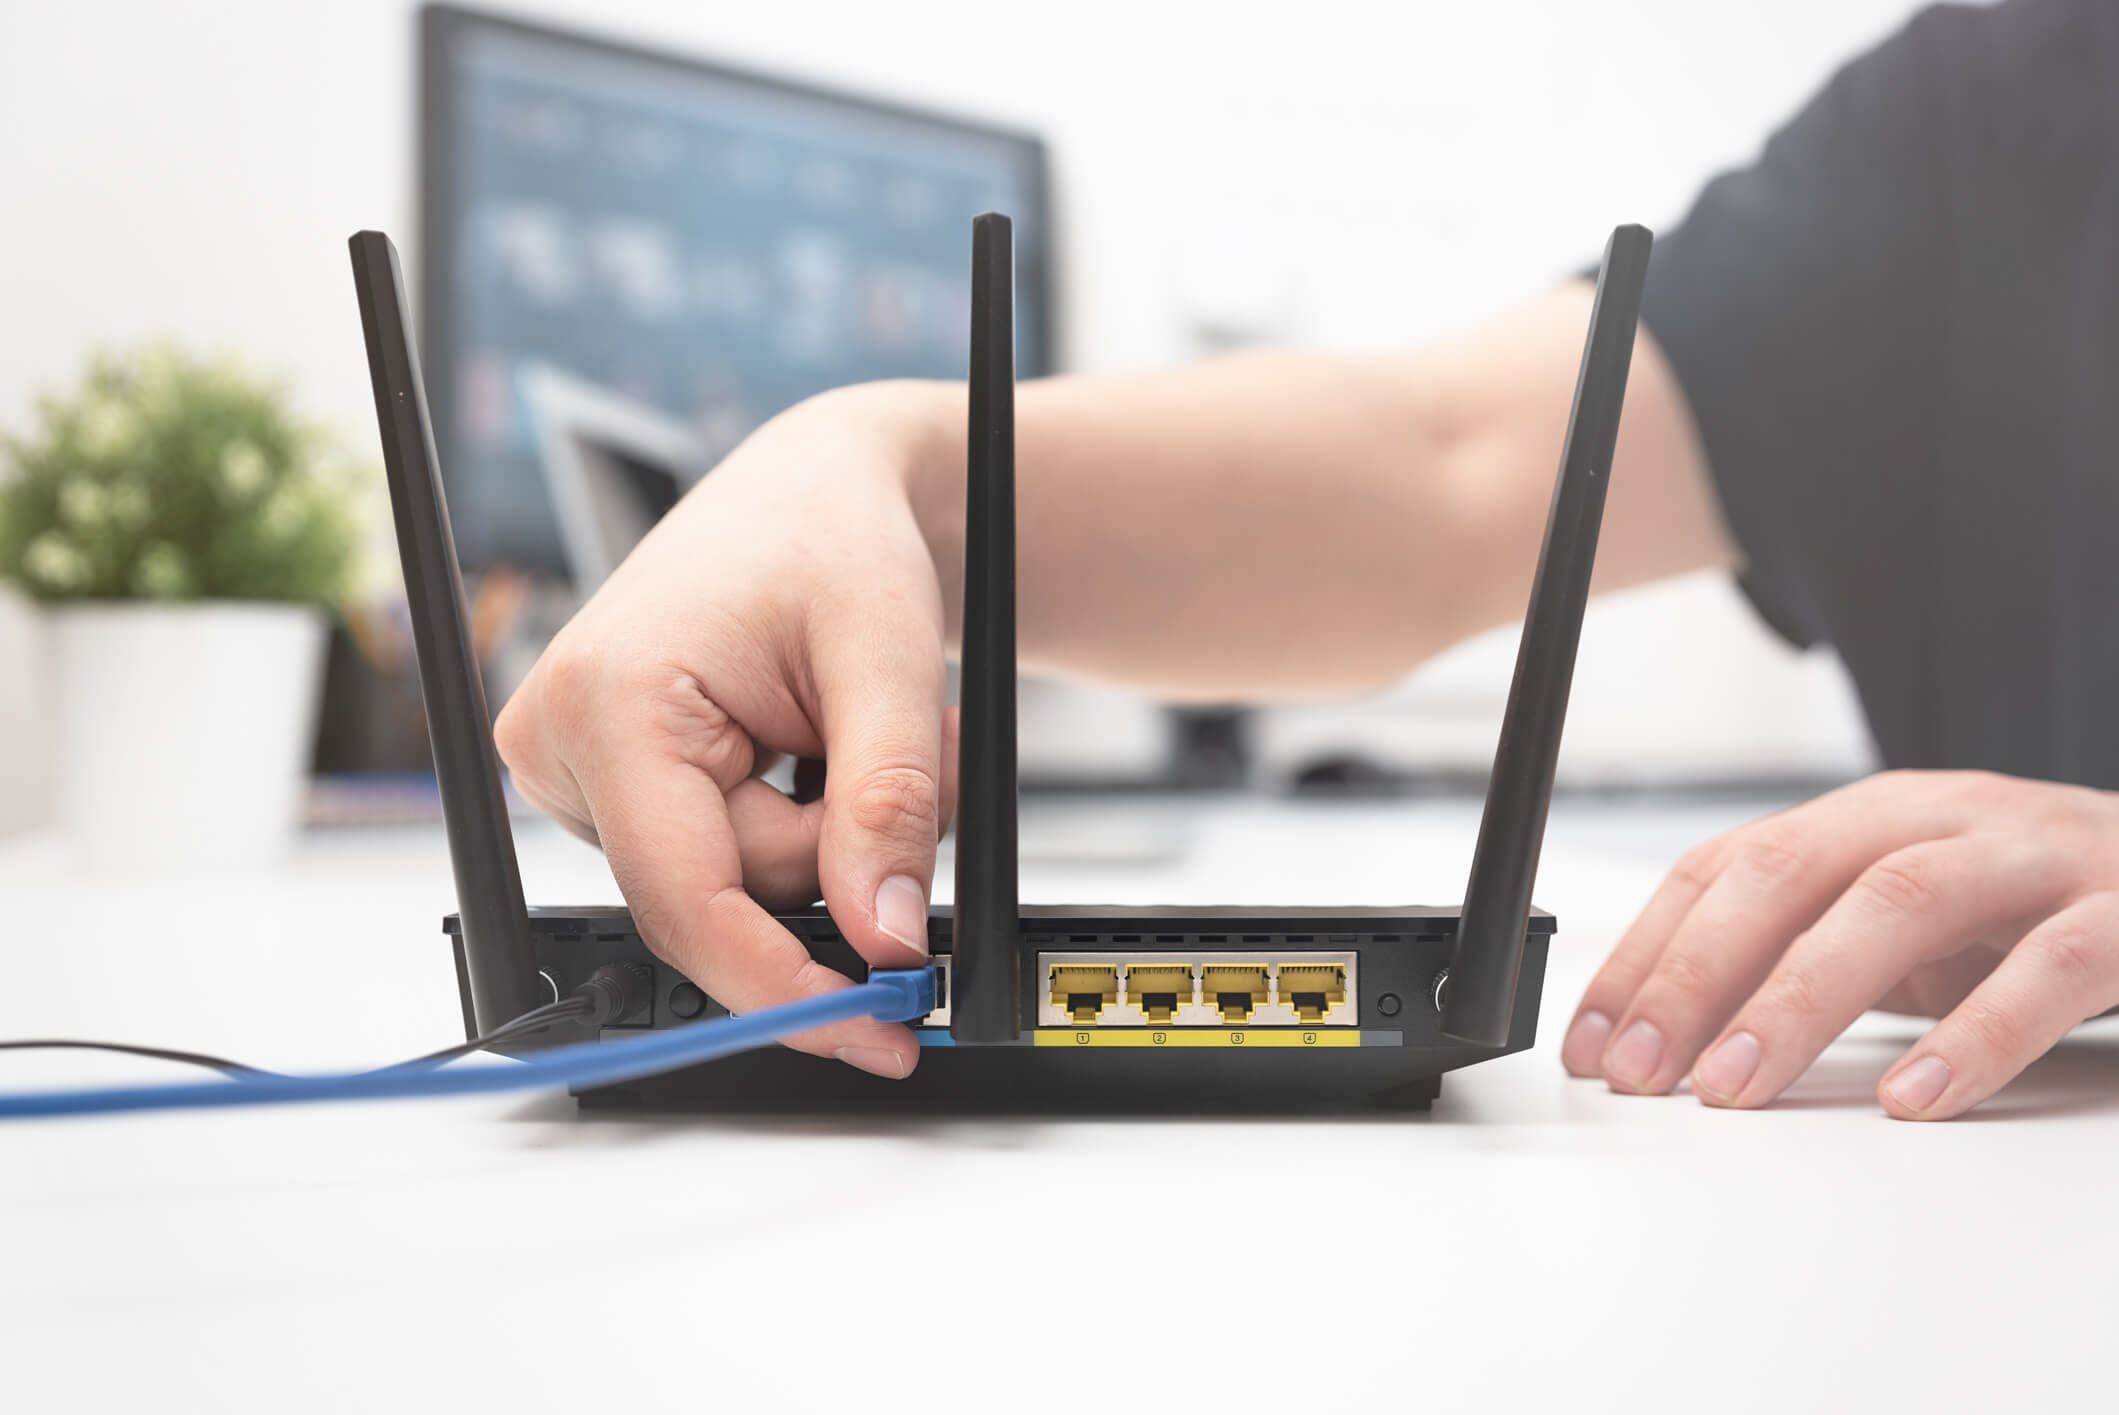 What Is An Overlay Network And Does It Include Routers?